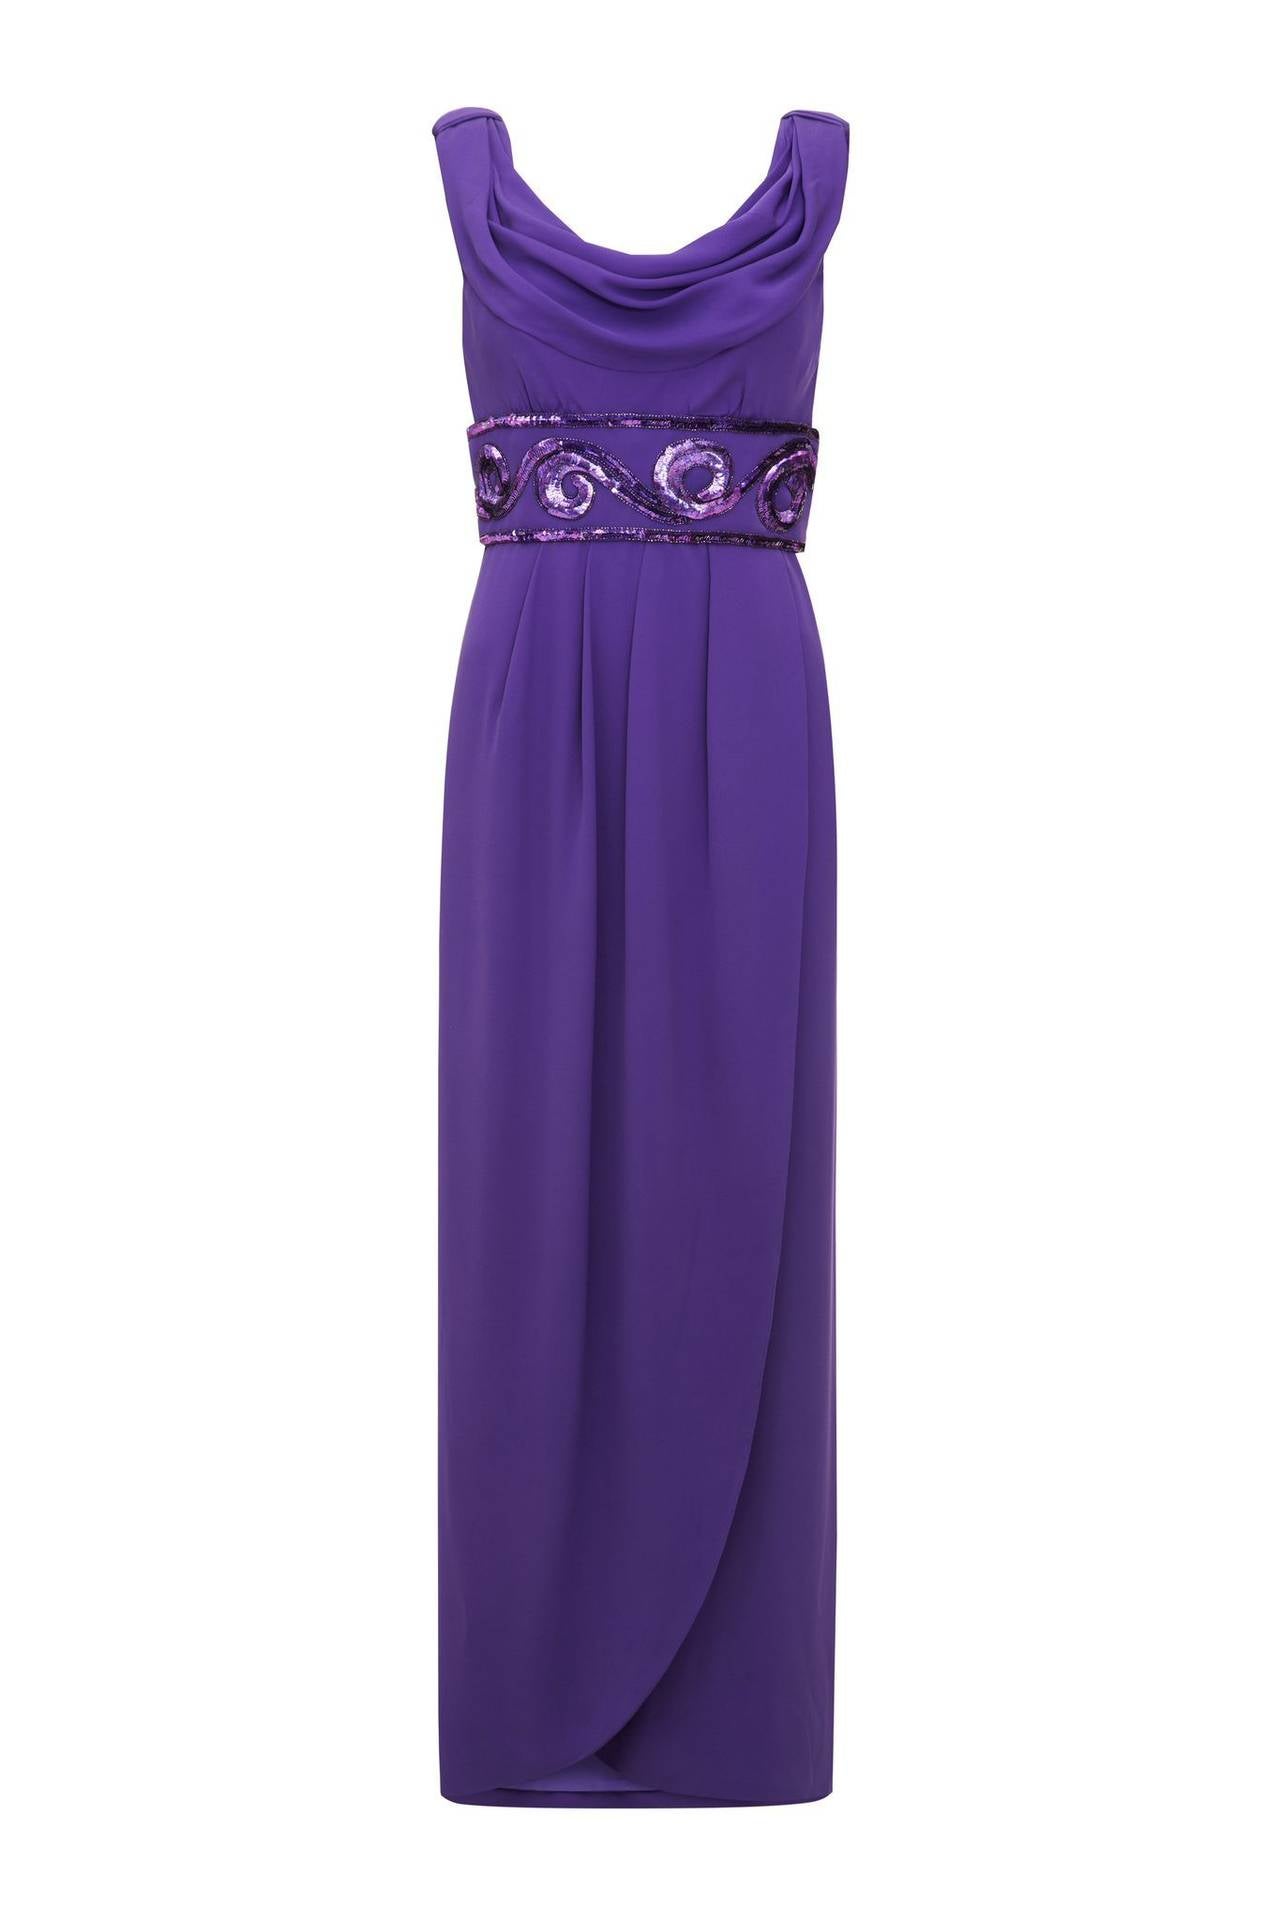 This striking early 1990s Grecian style purple silk evening dress is couture by designer Victor Edelstein, who is best known for dressing Princess Diana during her zenith as a global fashion icon. This piece is exquisitely constructed with internal